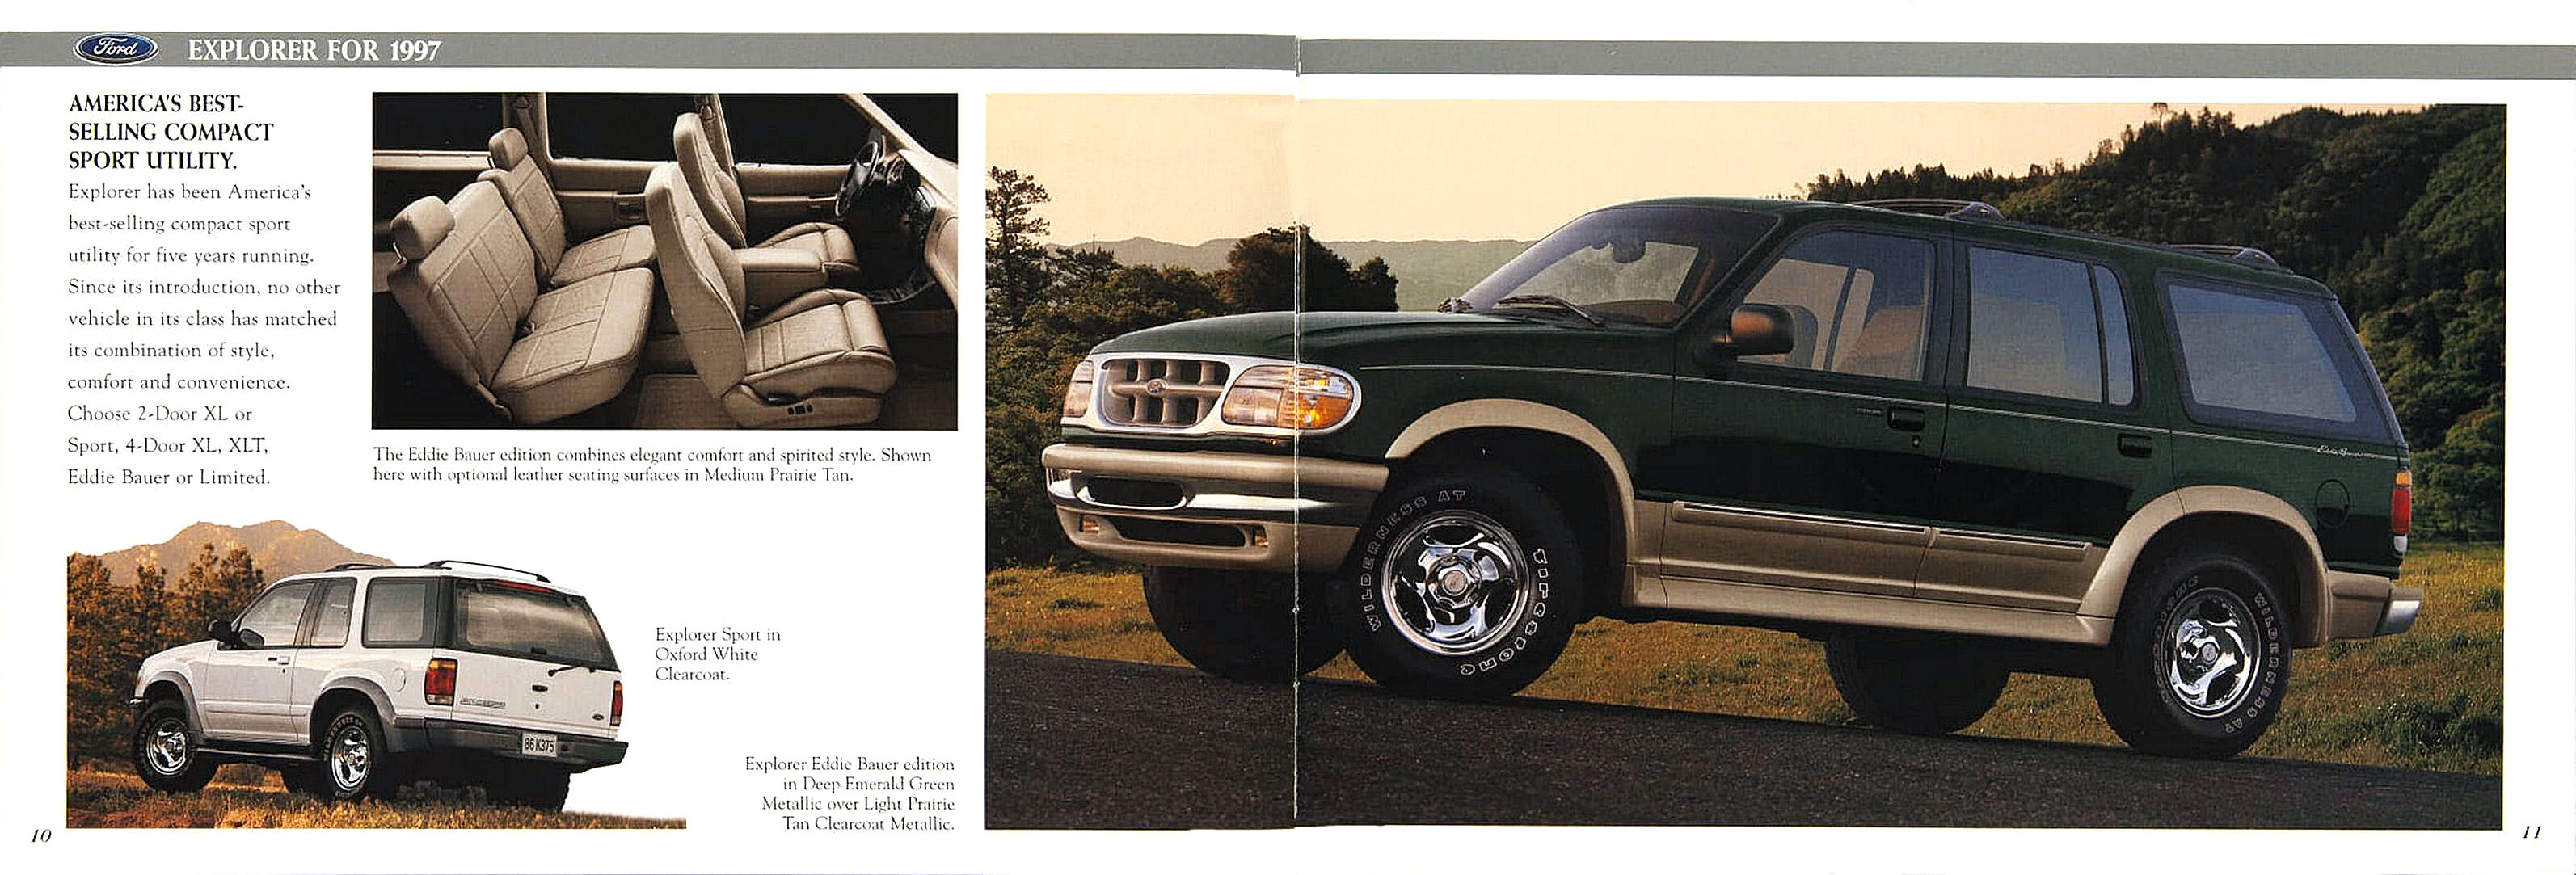 1997_Ford_Cars_and_Trucks_Rev-10-11